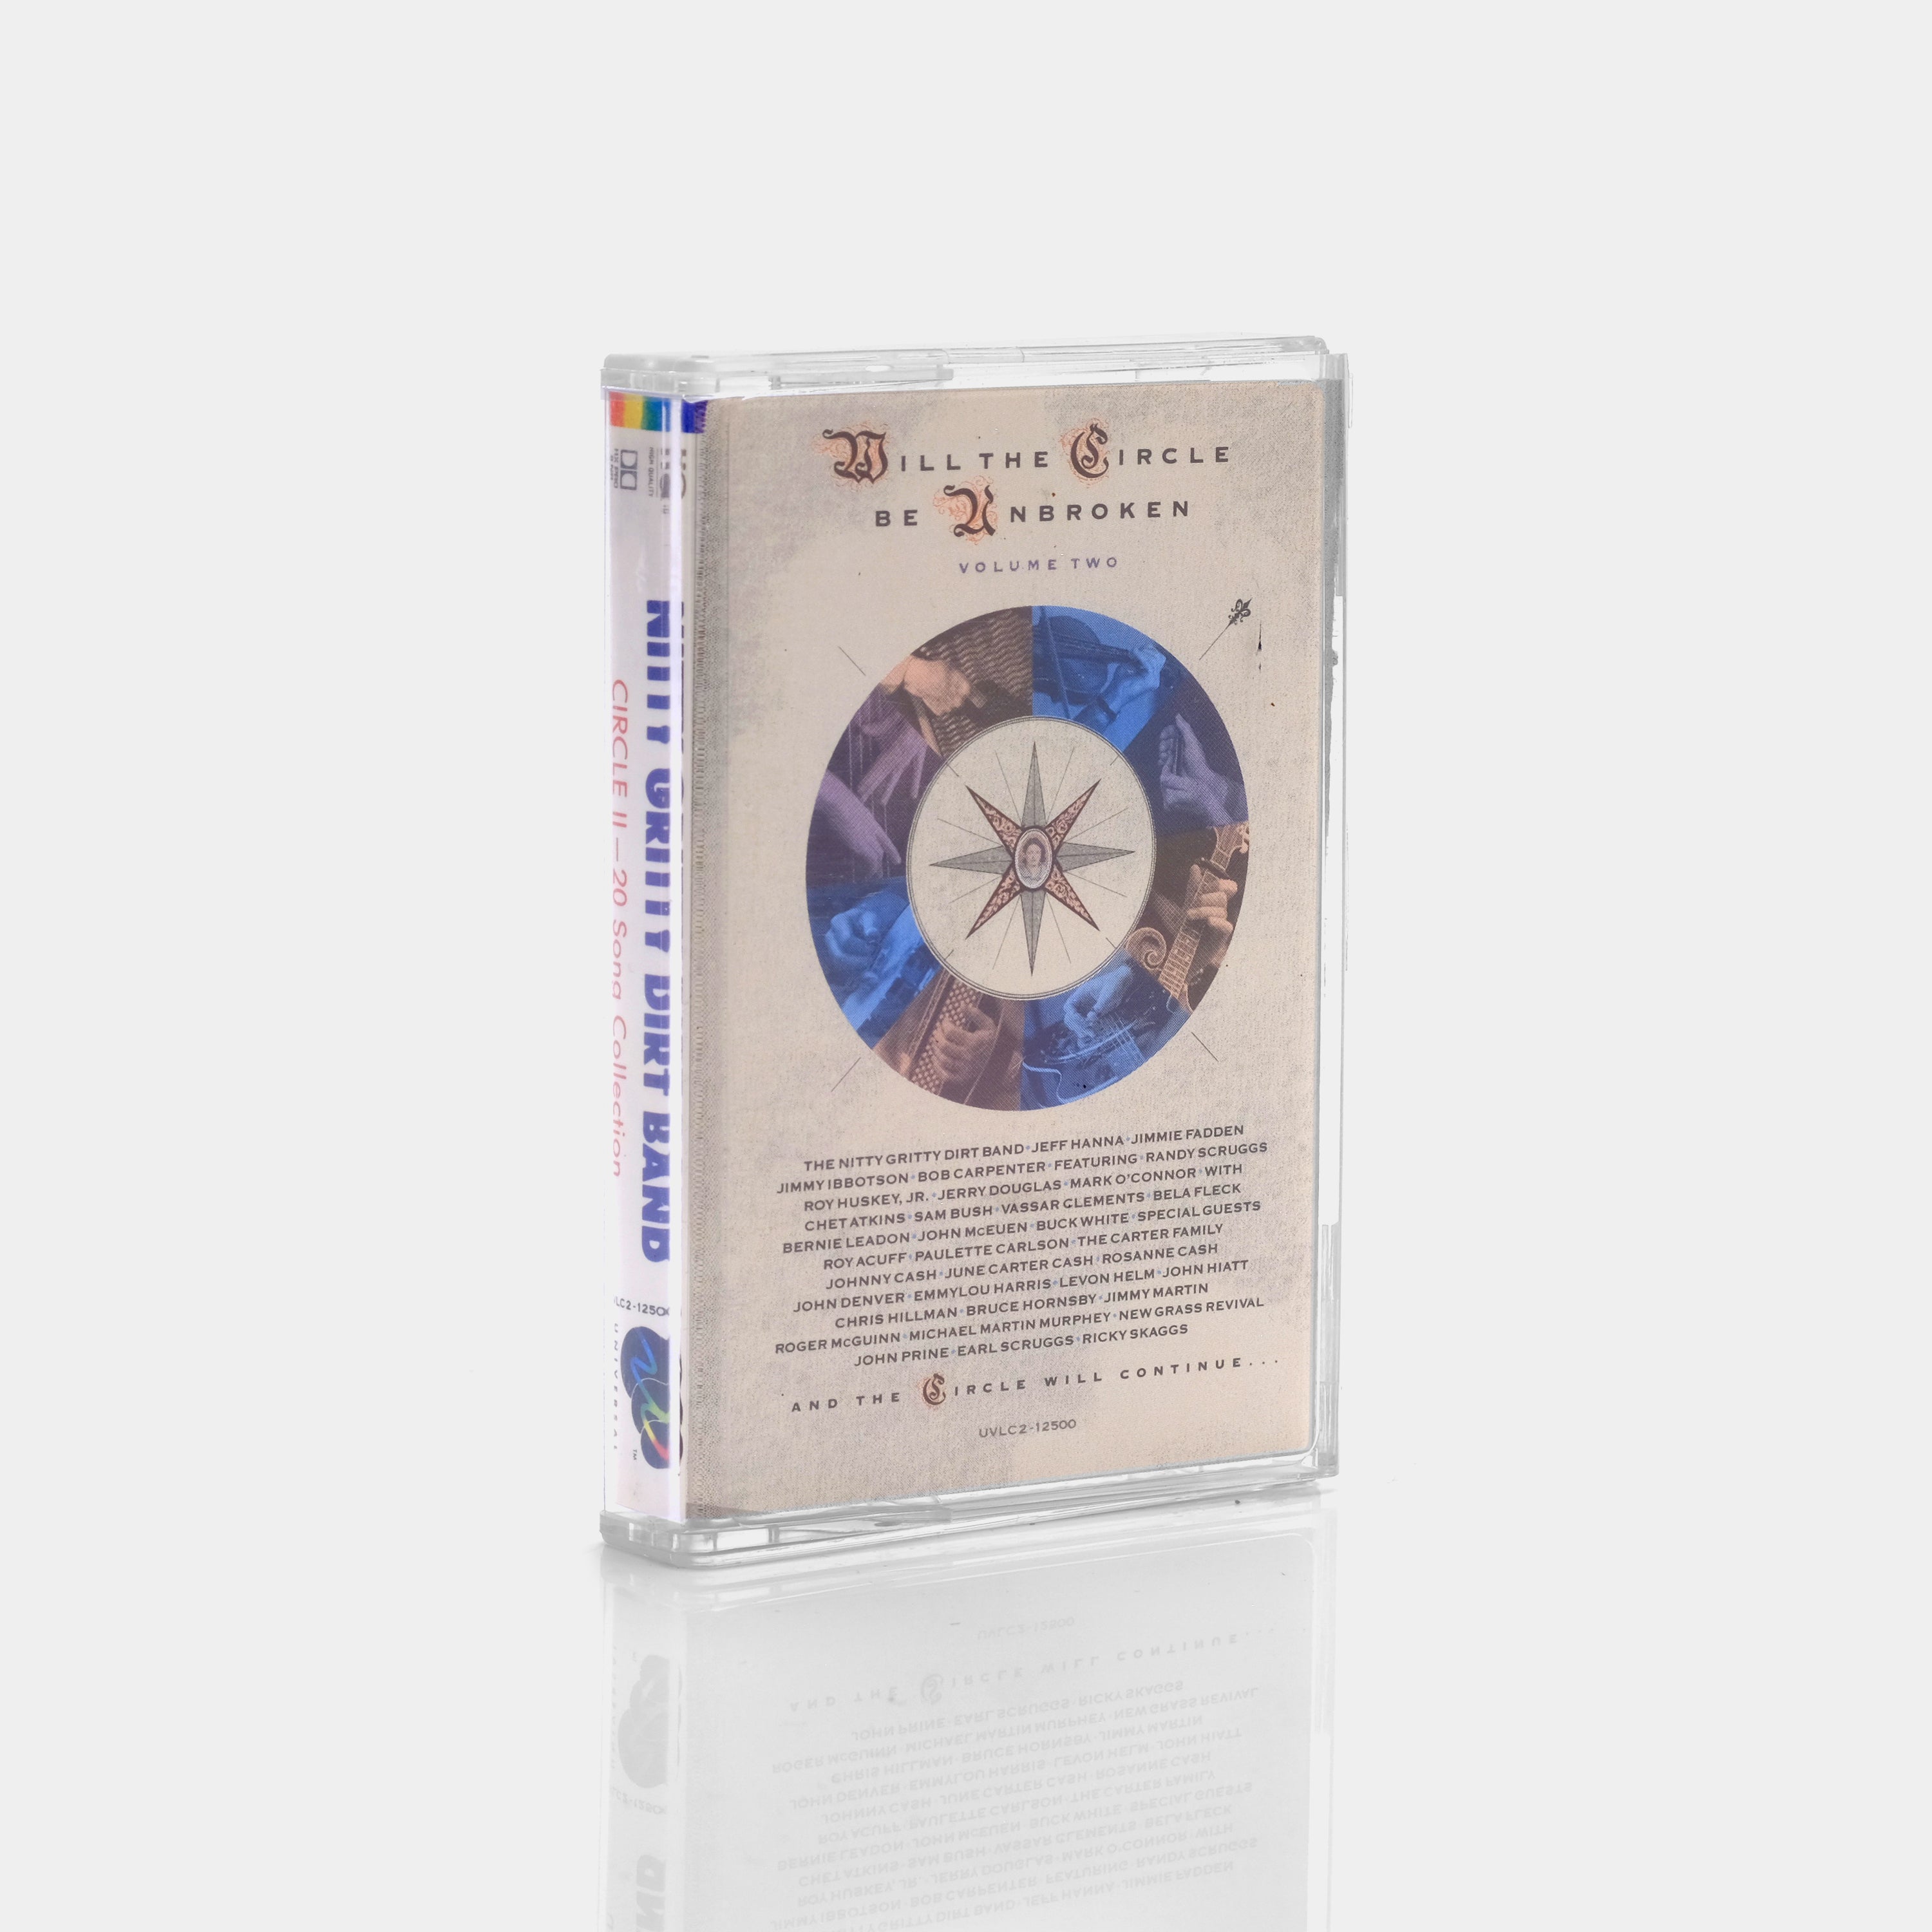 Nitty Gritty Dirt Band - Will The Circle Be Unbroken Volume Two Cassette Tape